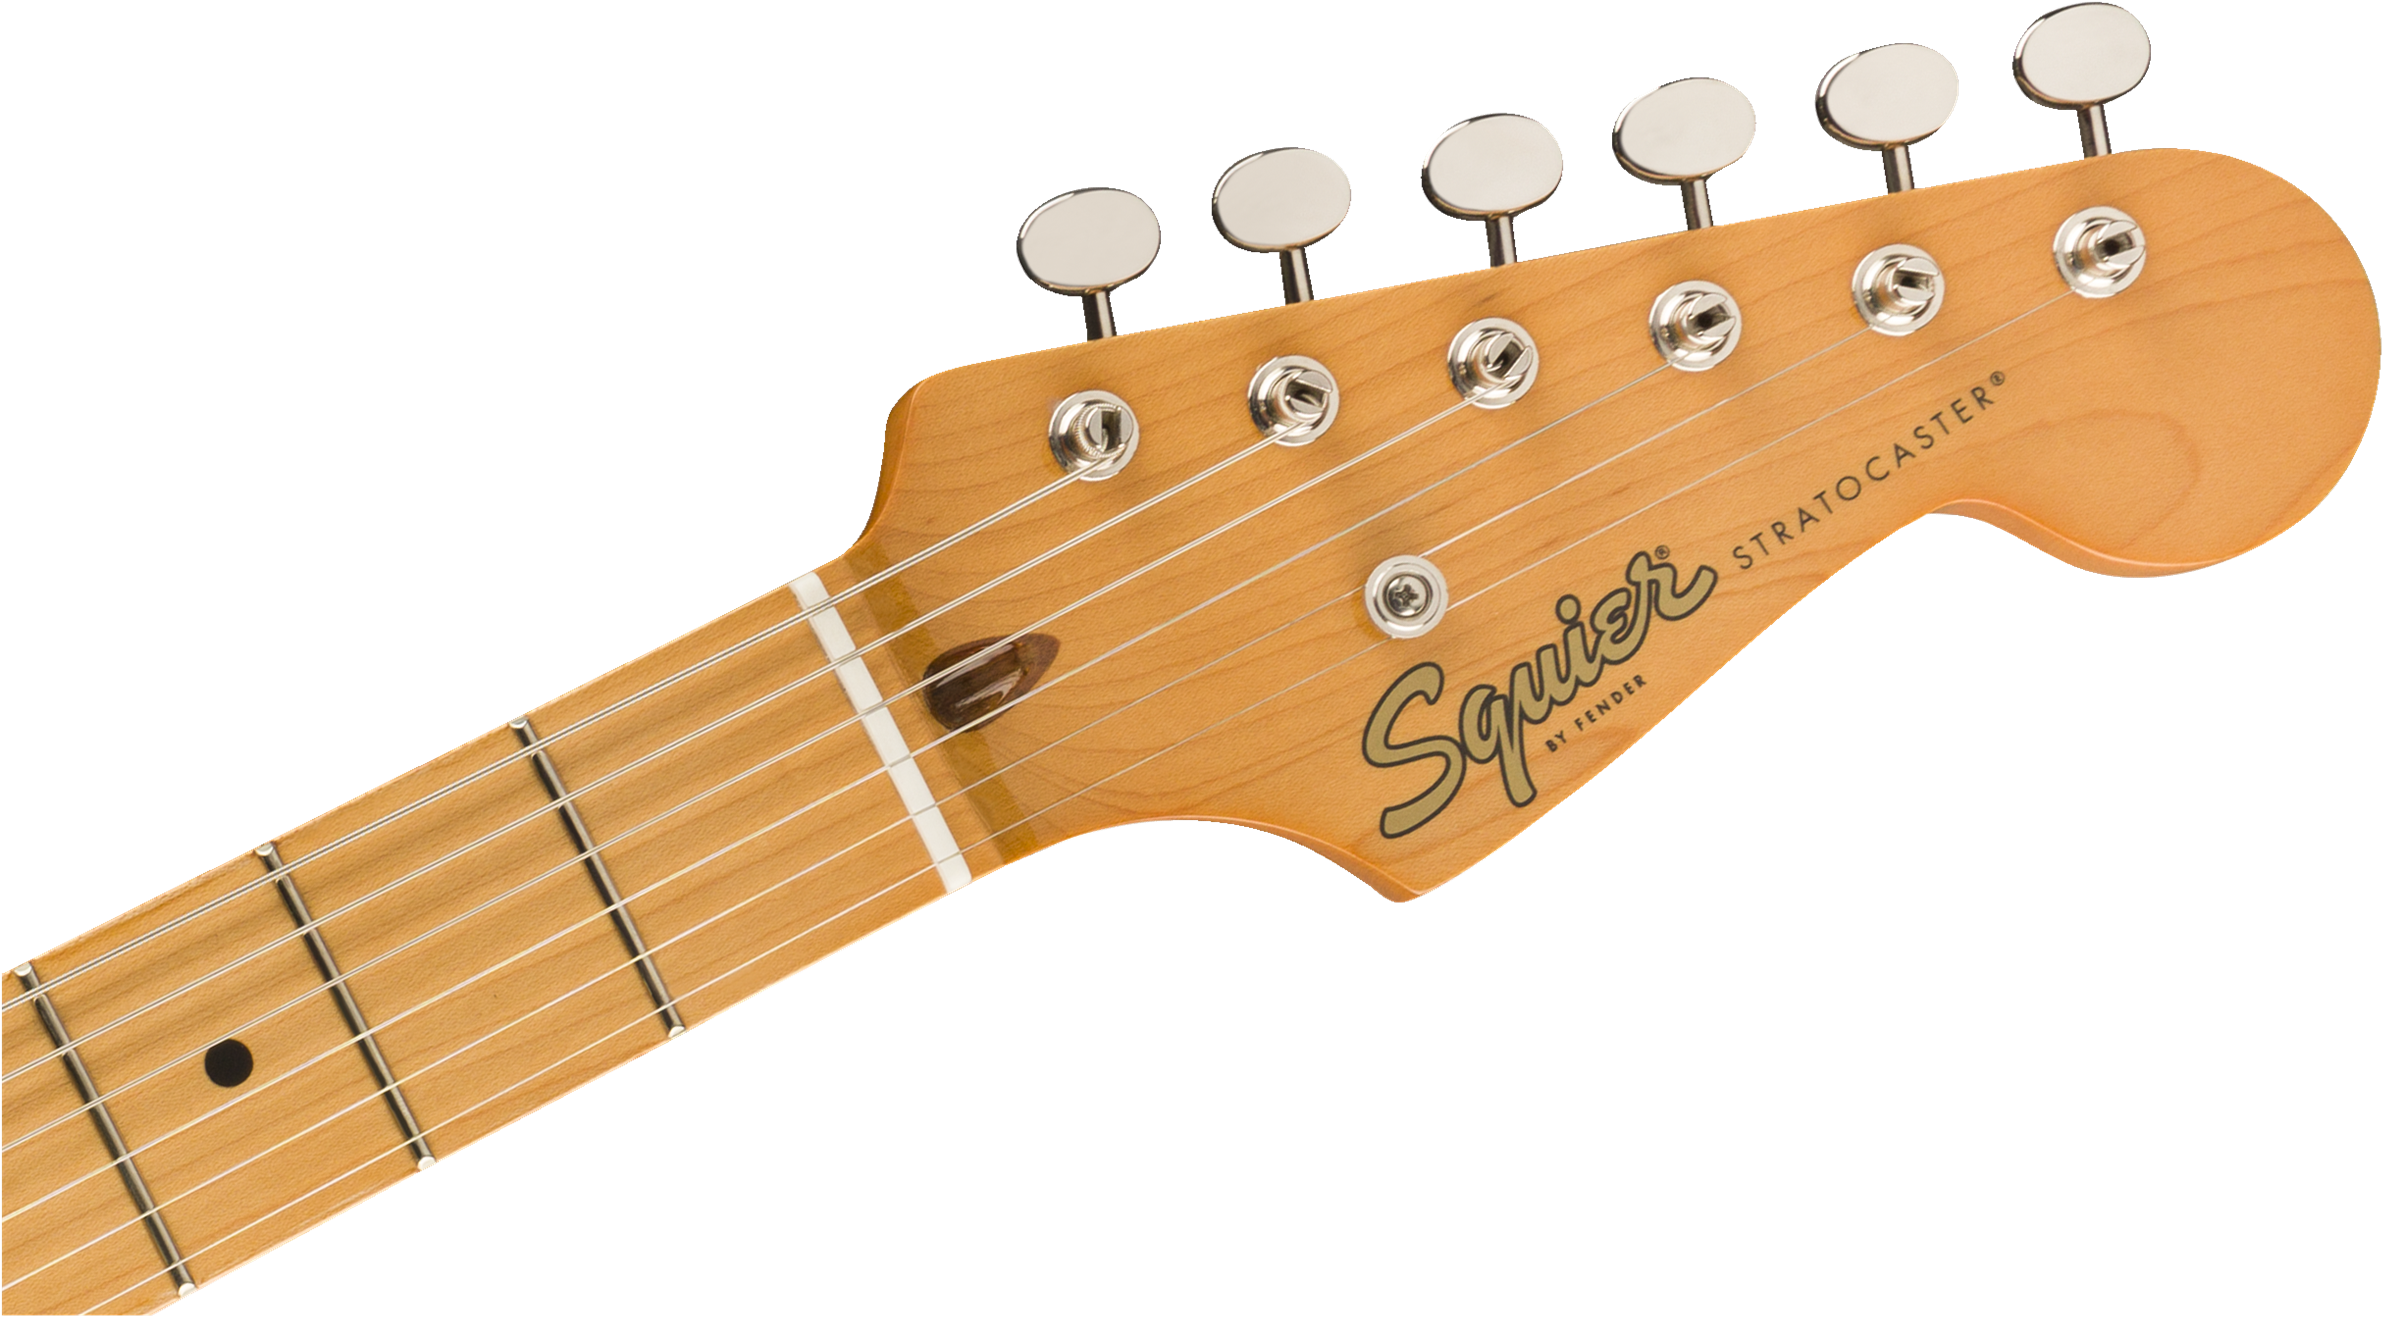 Squier Classic Vibe 50s Stratocaster Maple Fingerboard White Blonde 0374005501